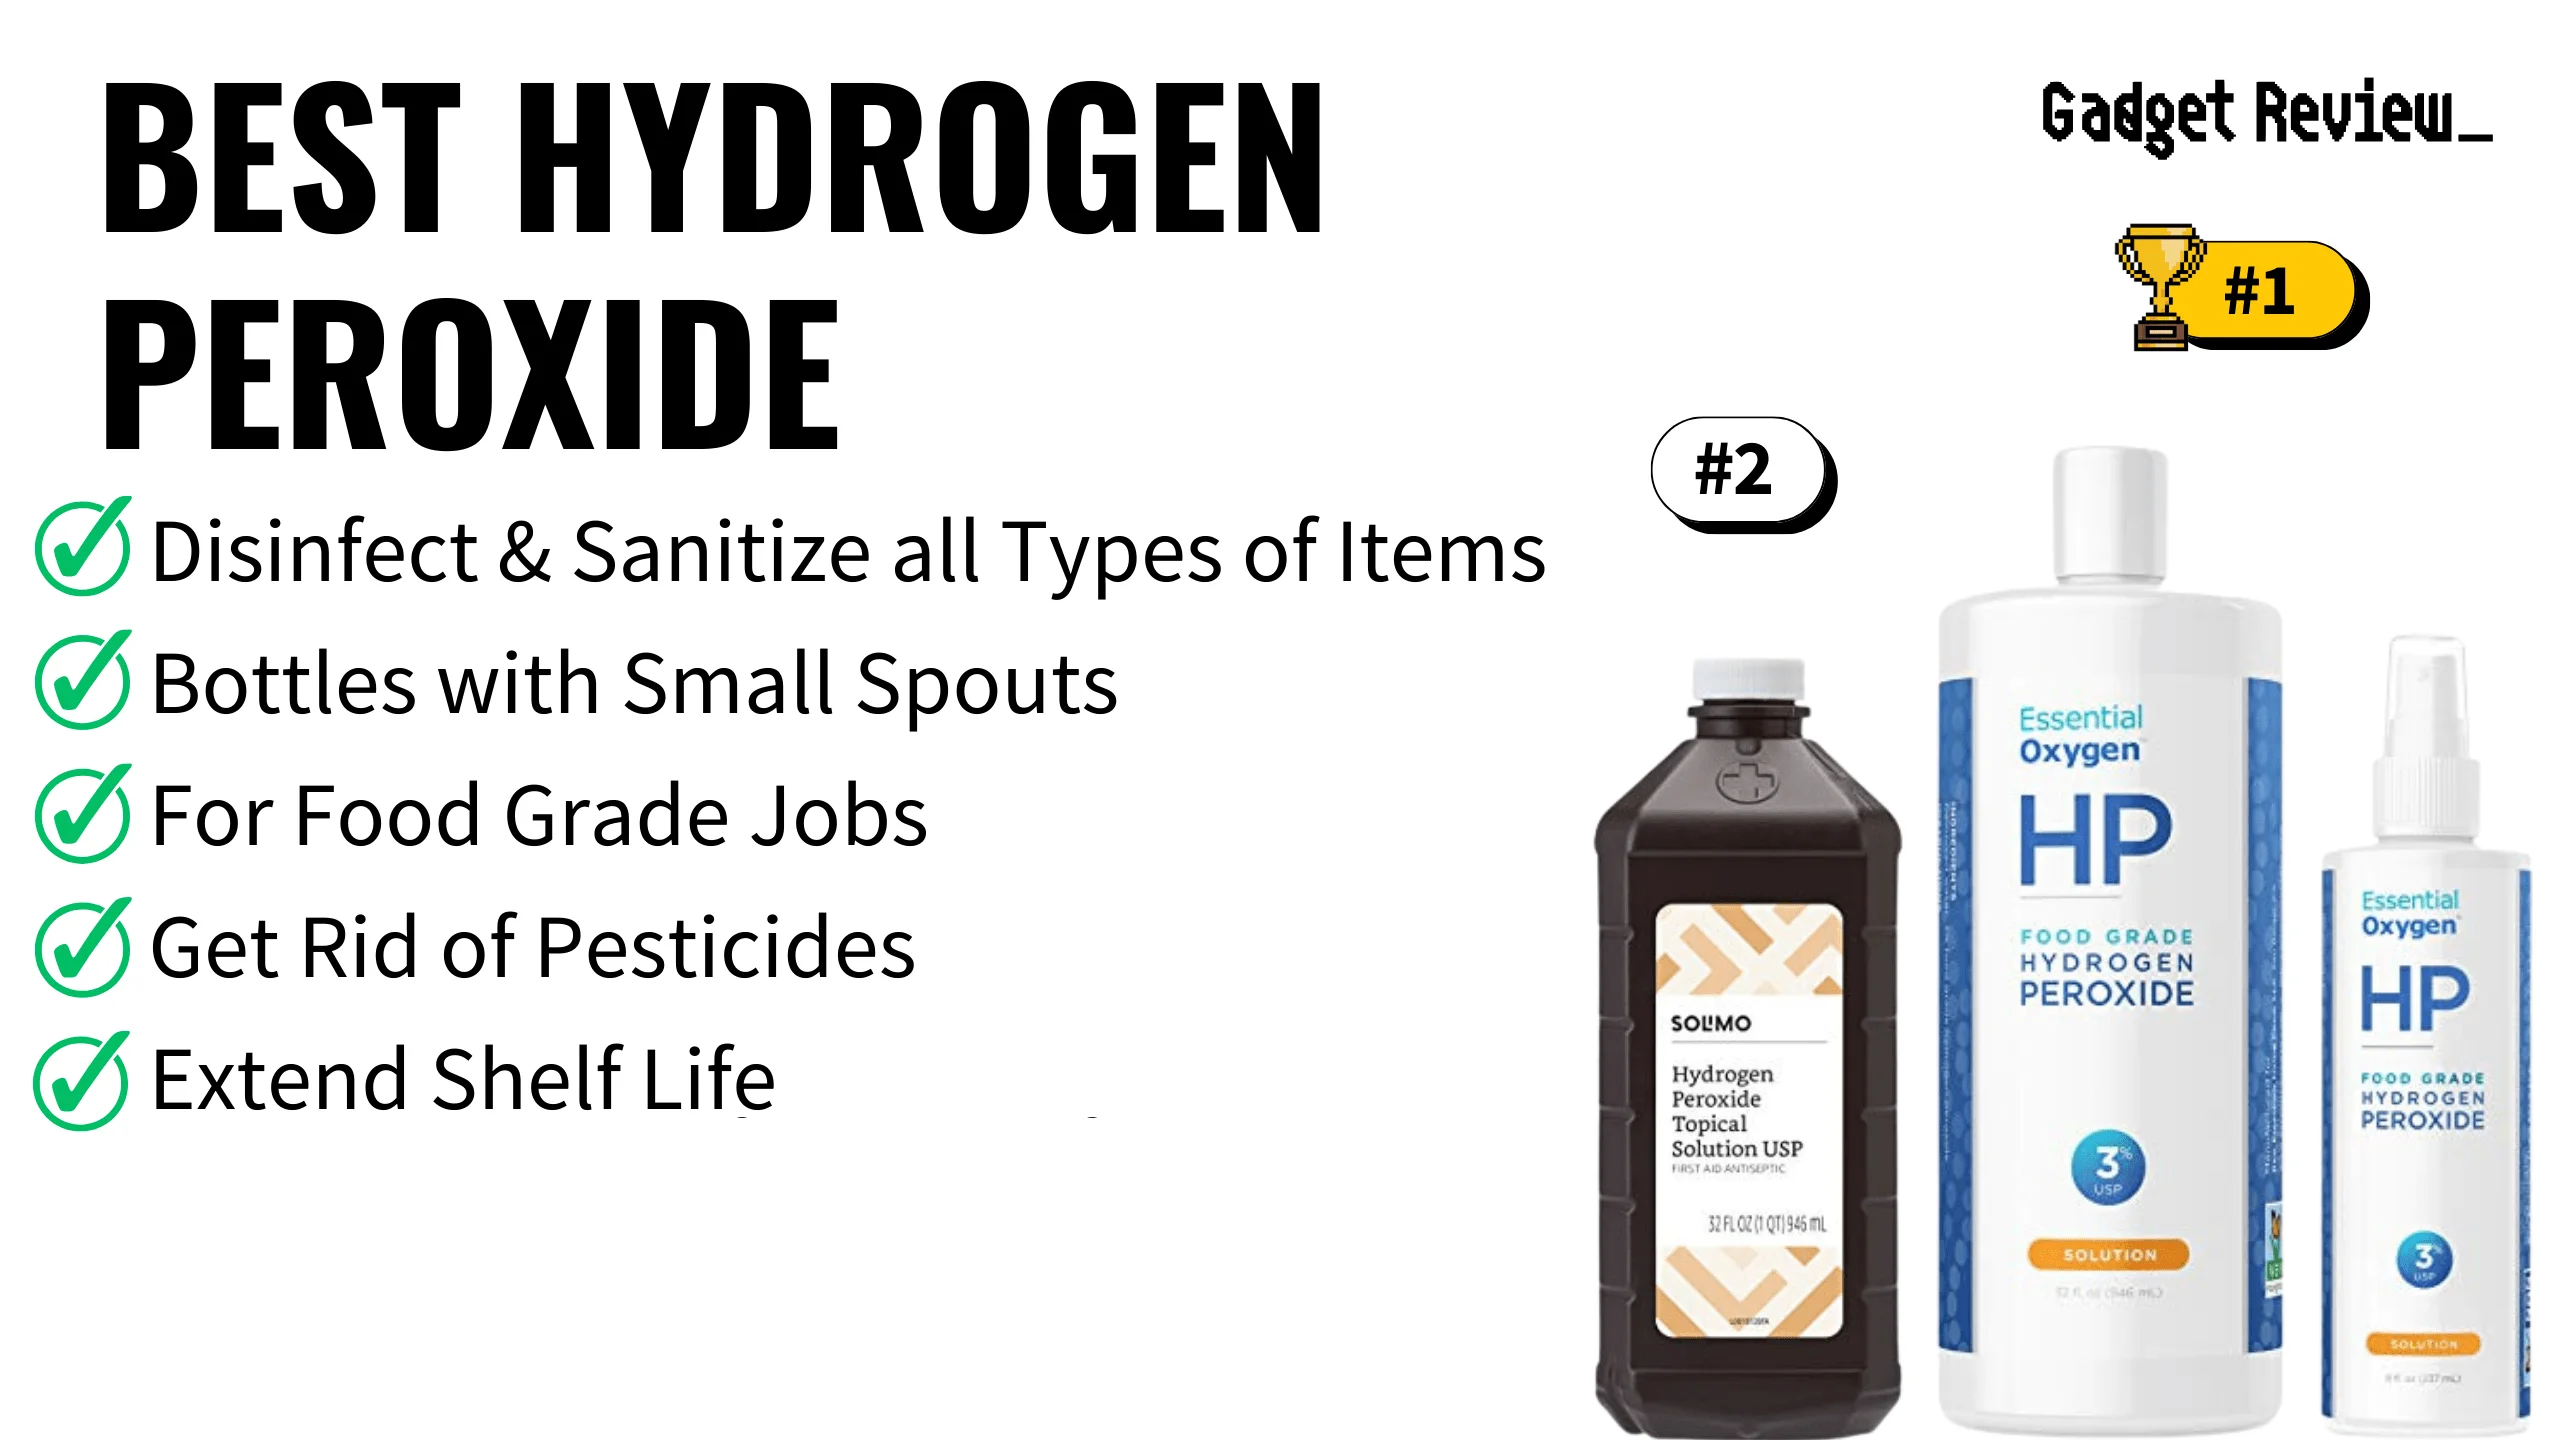 best hydrogen peroxide featured image that shows the top three best bathroom essential models